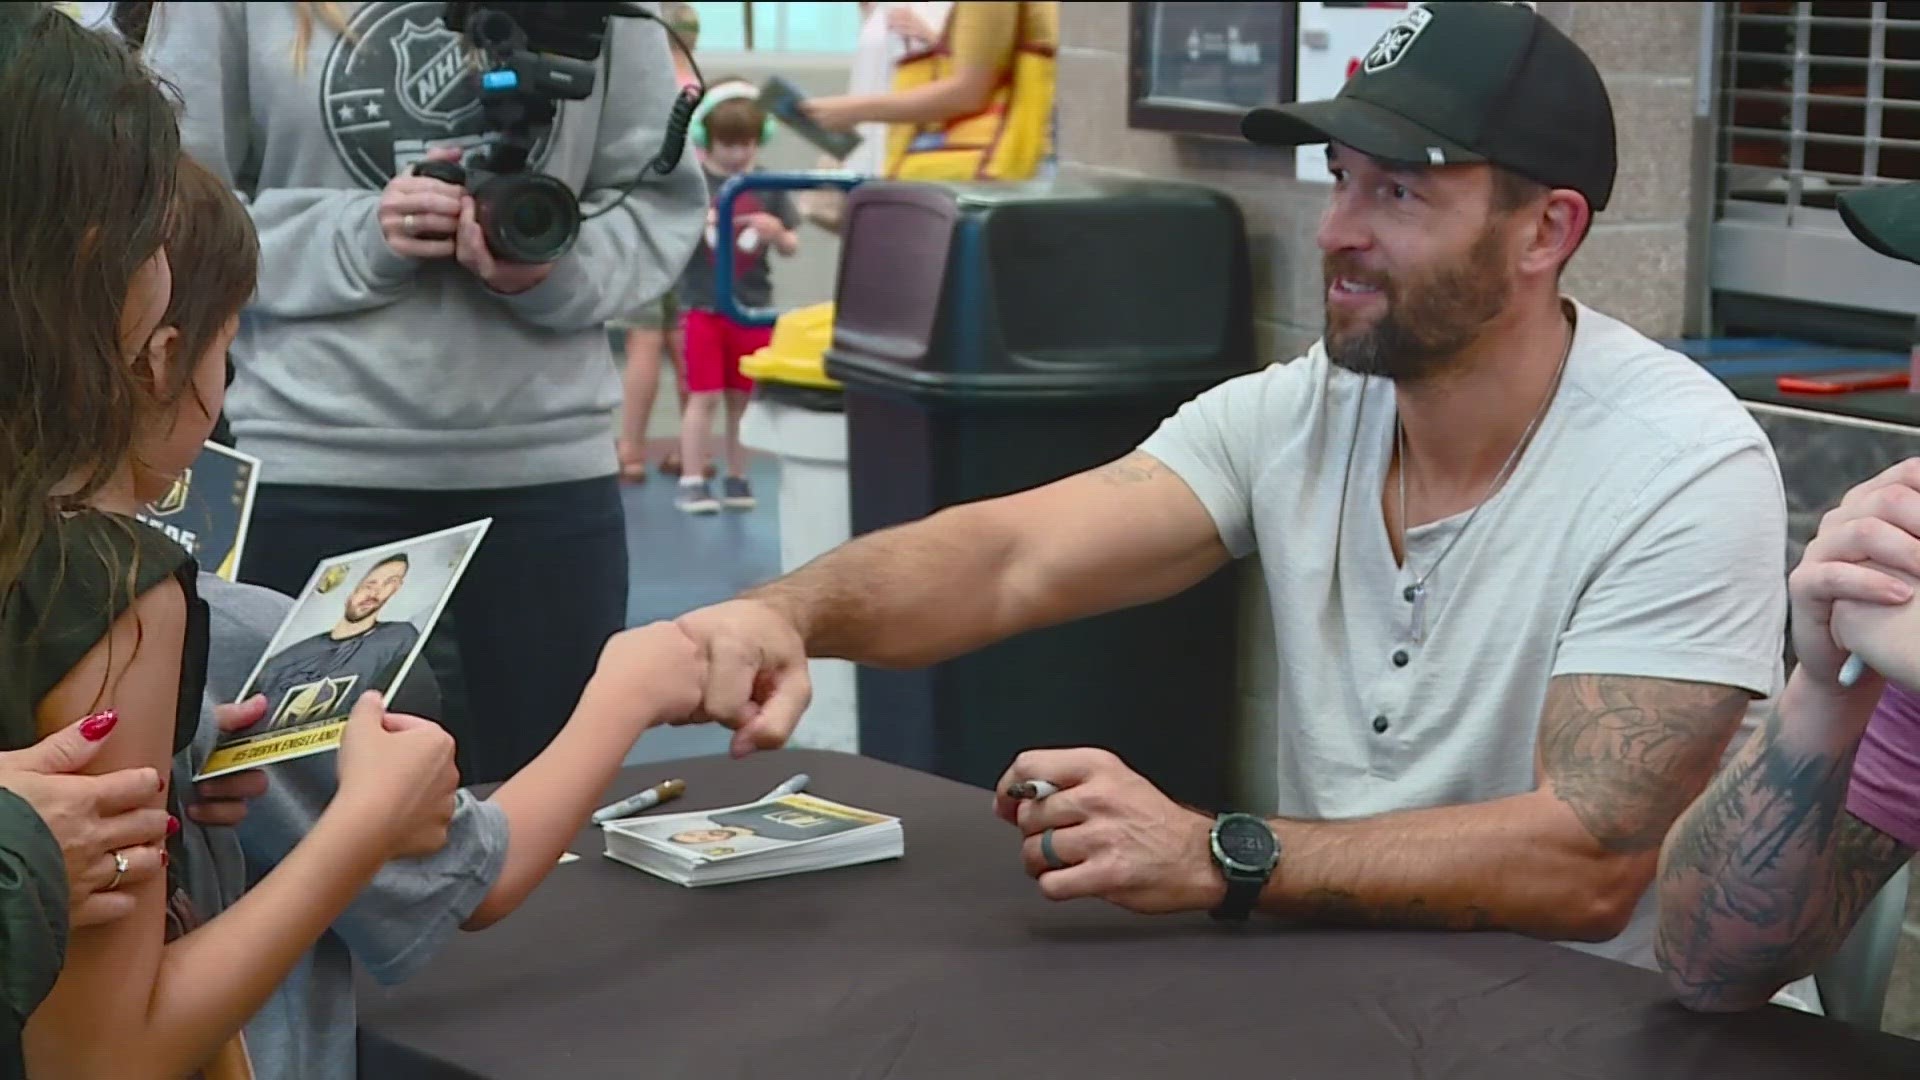 Logan Thompson and Deryk Engelland spent Tuesday morning teaching kids in a hockey clinic and signing autographs as part of the 2023 VGK Road Trip.